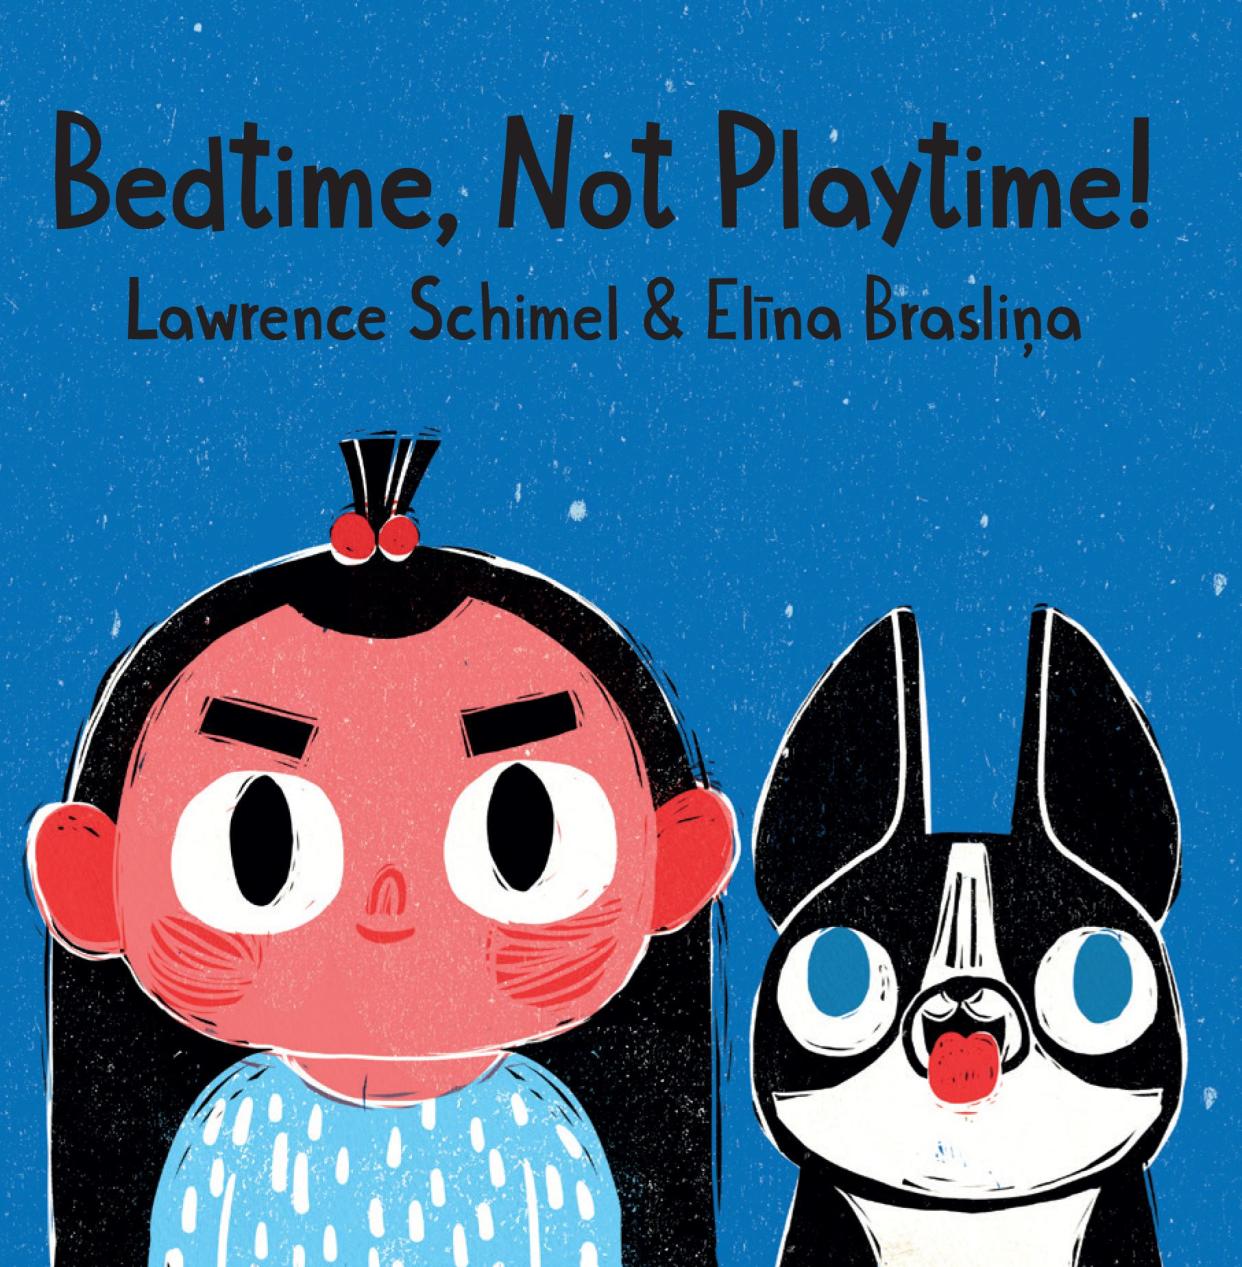 Bedtime, Not Playtime!, written by Lawrence Schimel and illustrated by Elīna Brasliņa. (Lawrence Schimel and Elina Braslina)